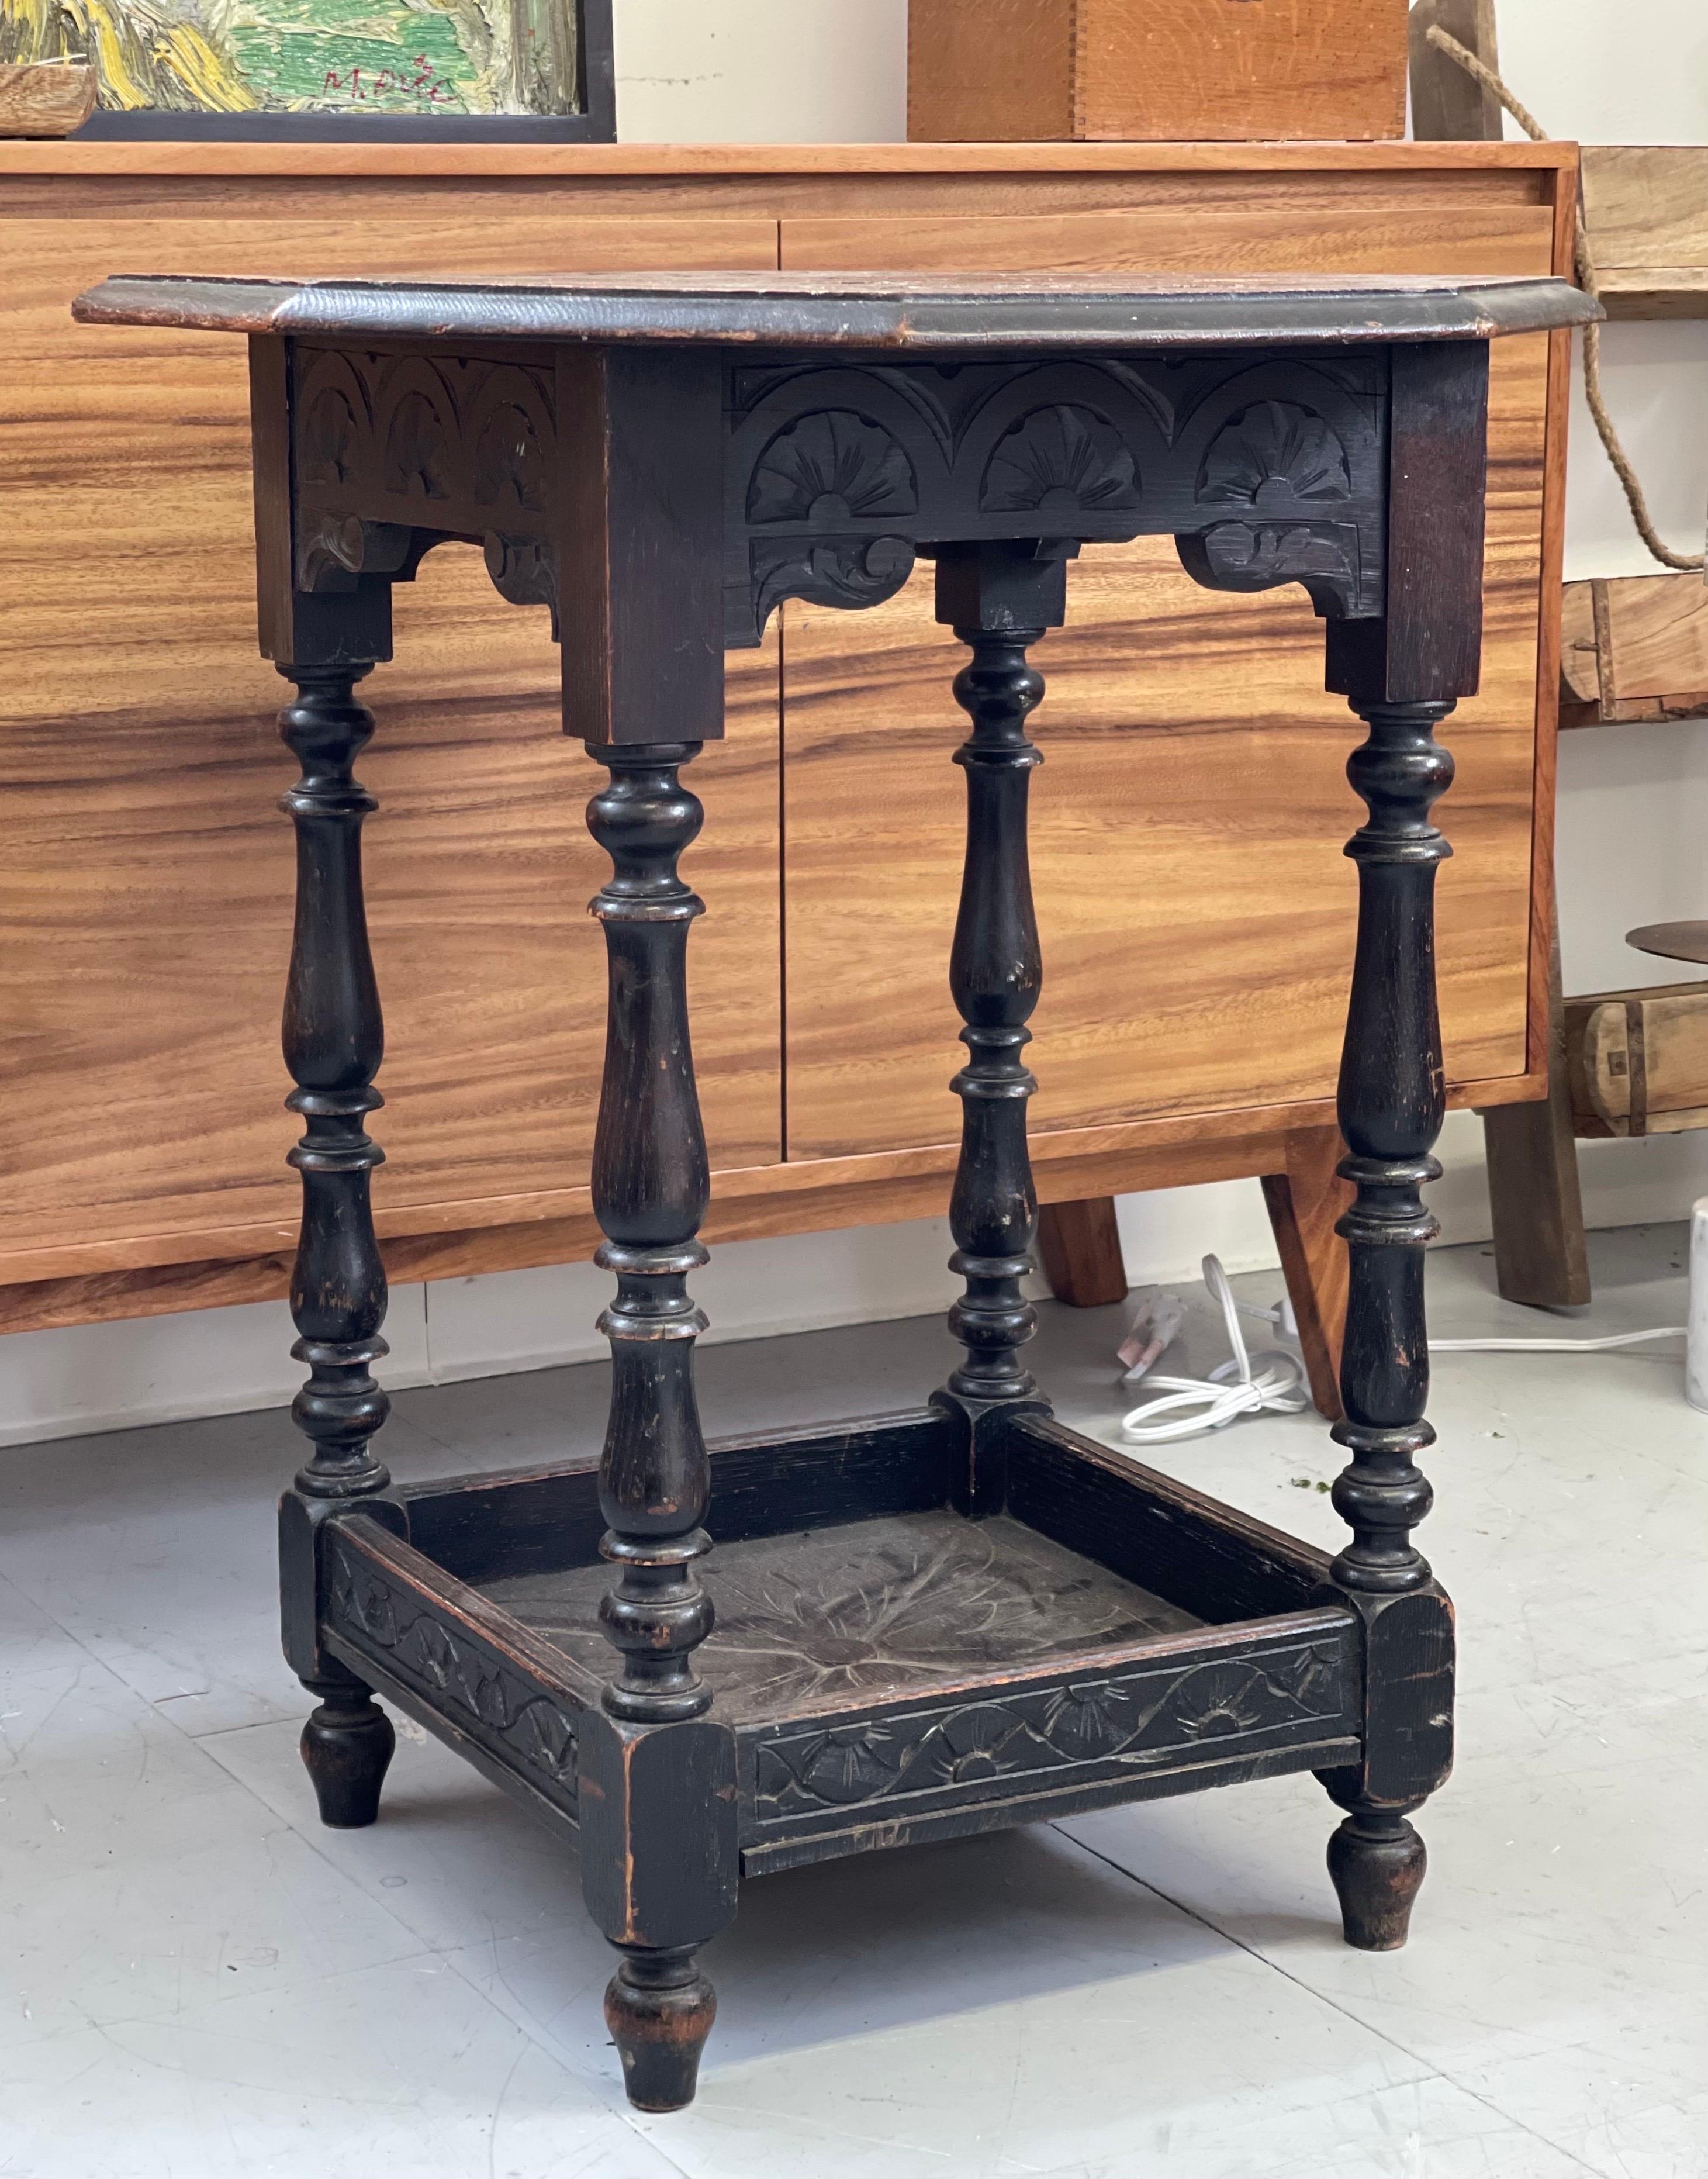 Antique Table Stand. Uk Import. This Table has Primitive Style and hand Carved Floral Design on Both levels and has Great Character patina to the Wood.

Dimensions. 23 1/2 W ; 23 1/2 D ; 28 H.